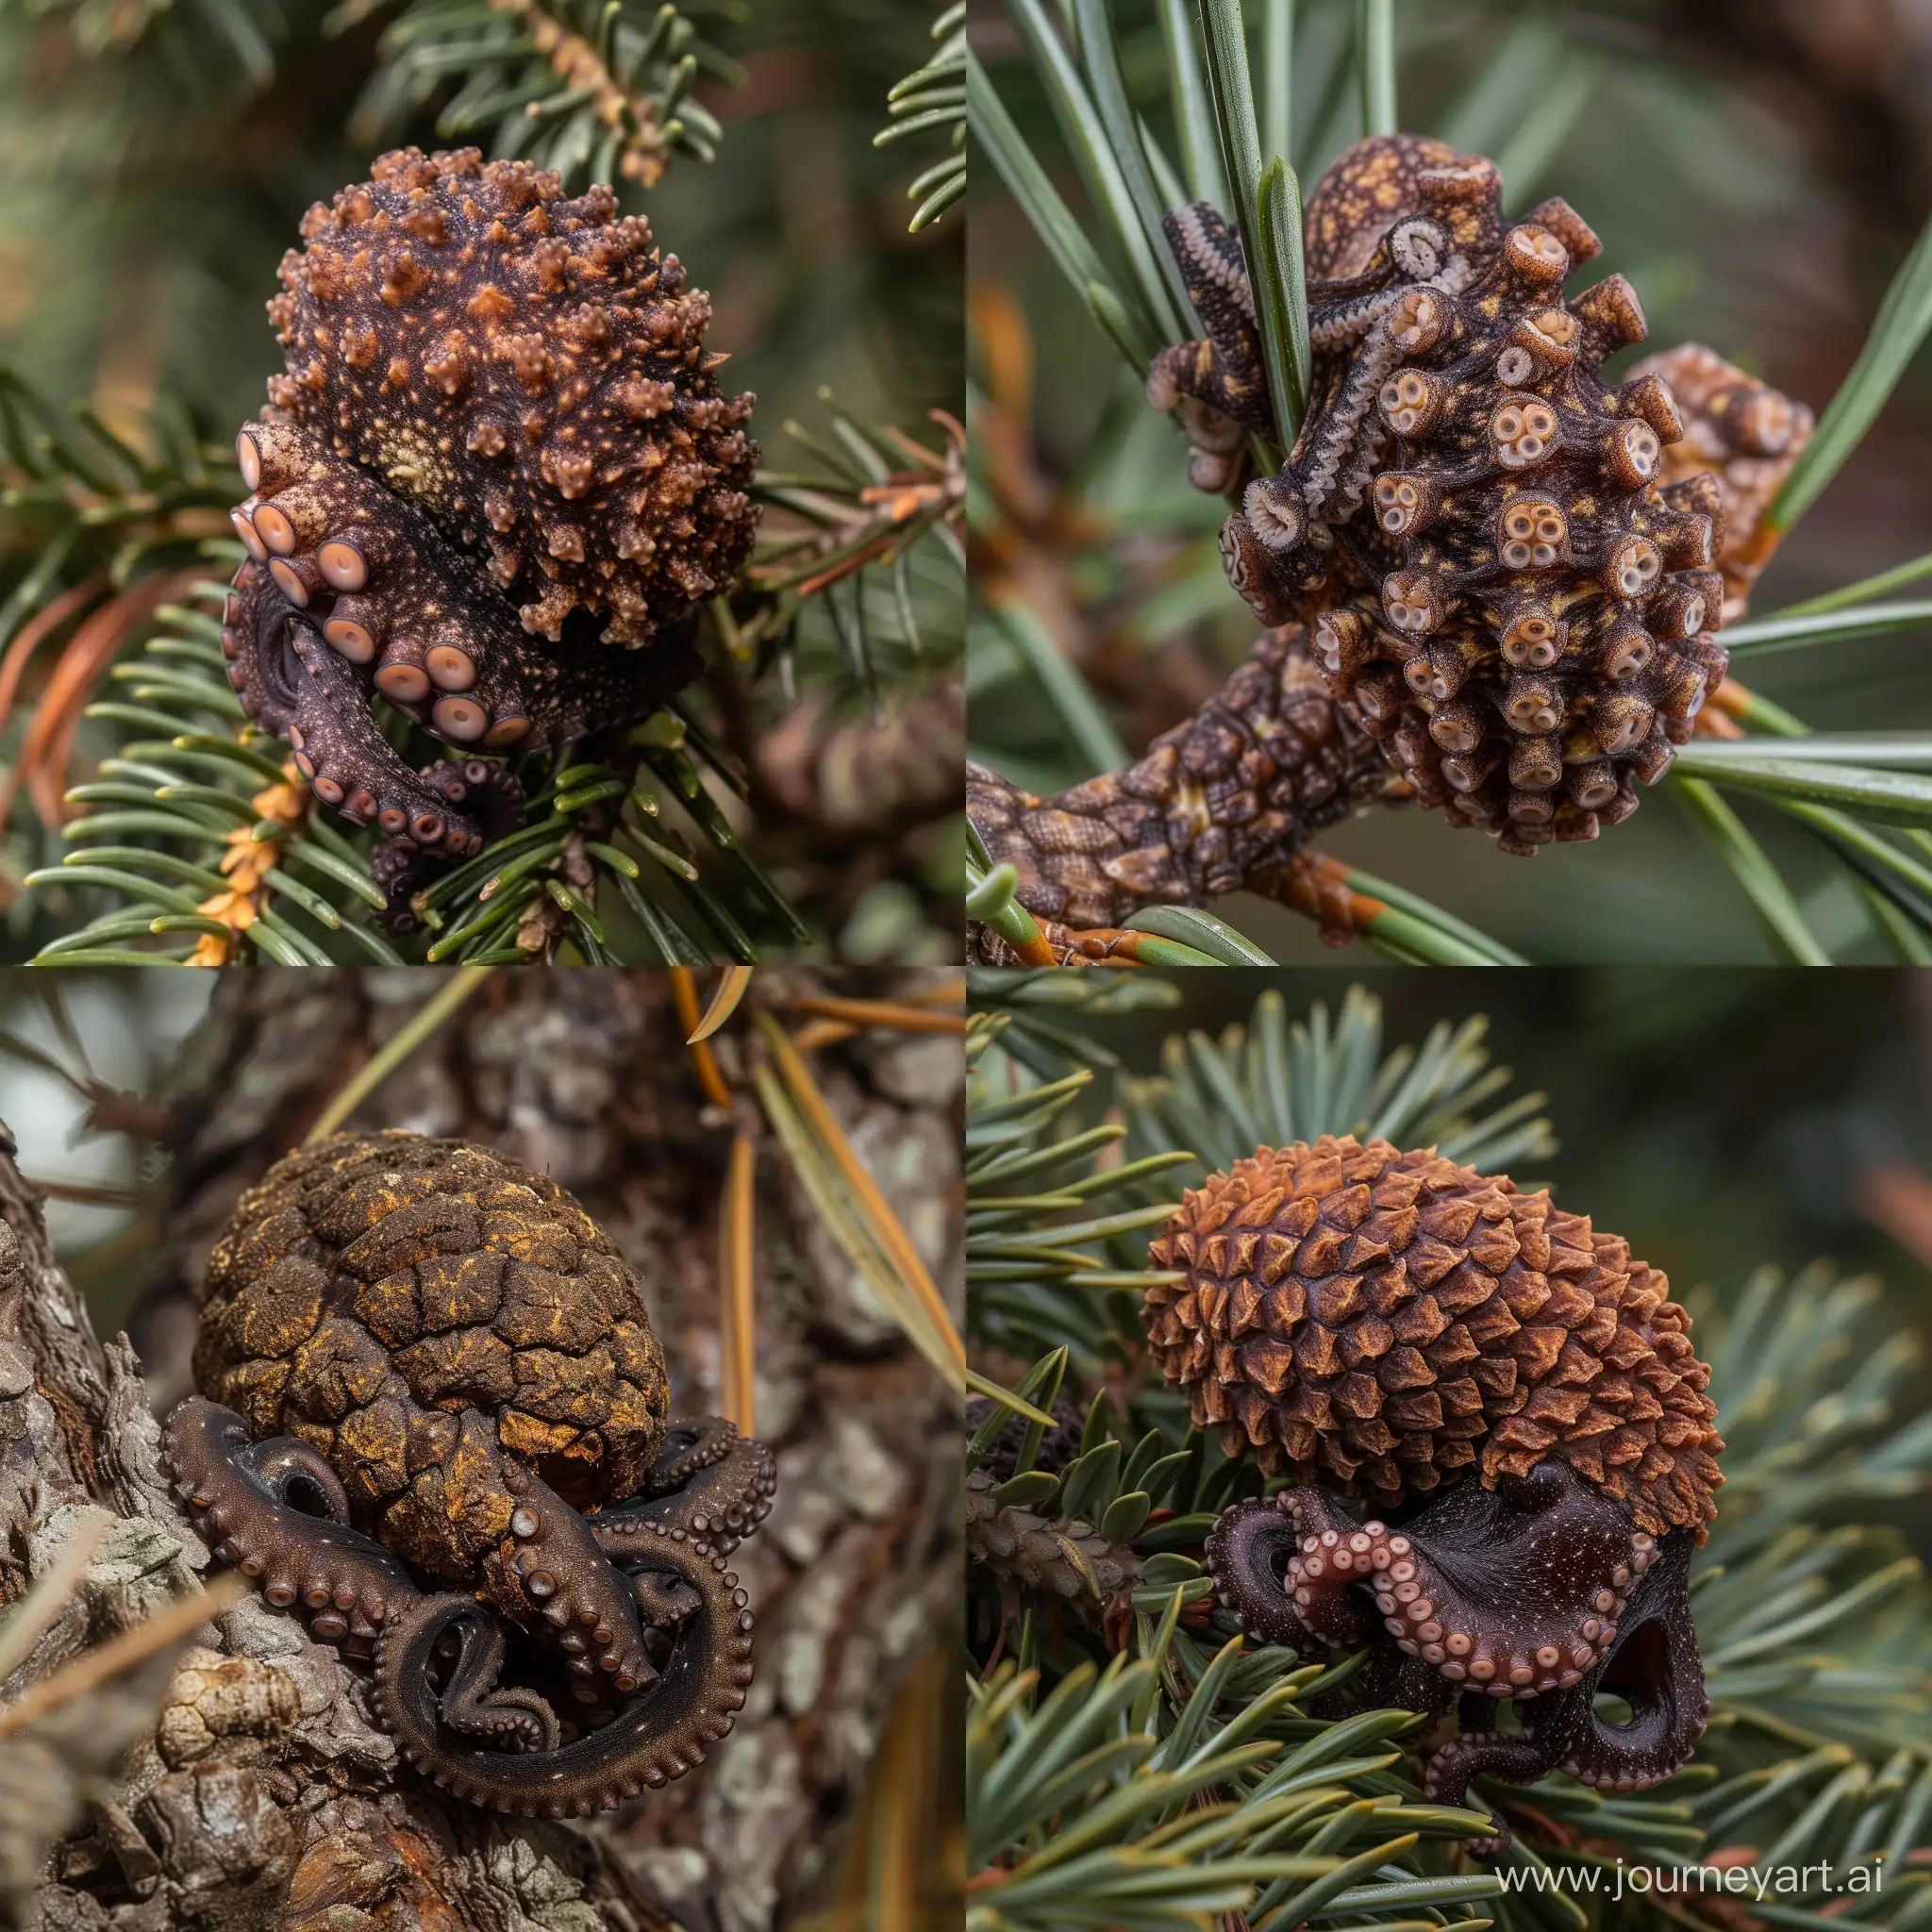 award winning wildlife photo of an small mottled dark brown octopus in a pine tree mimicking the shape, color and texture of a pinecone, covered in pinecone like scales, it could be mistaken for a pinecone, temperate pine rainforest, daylight, telephoto lens, canon camera